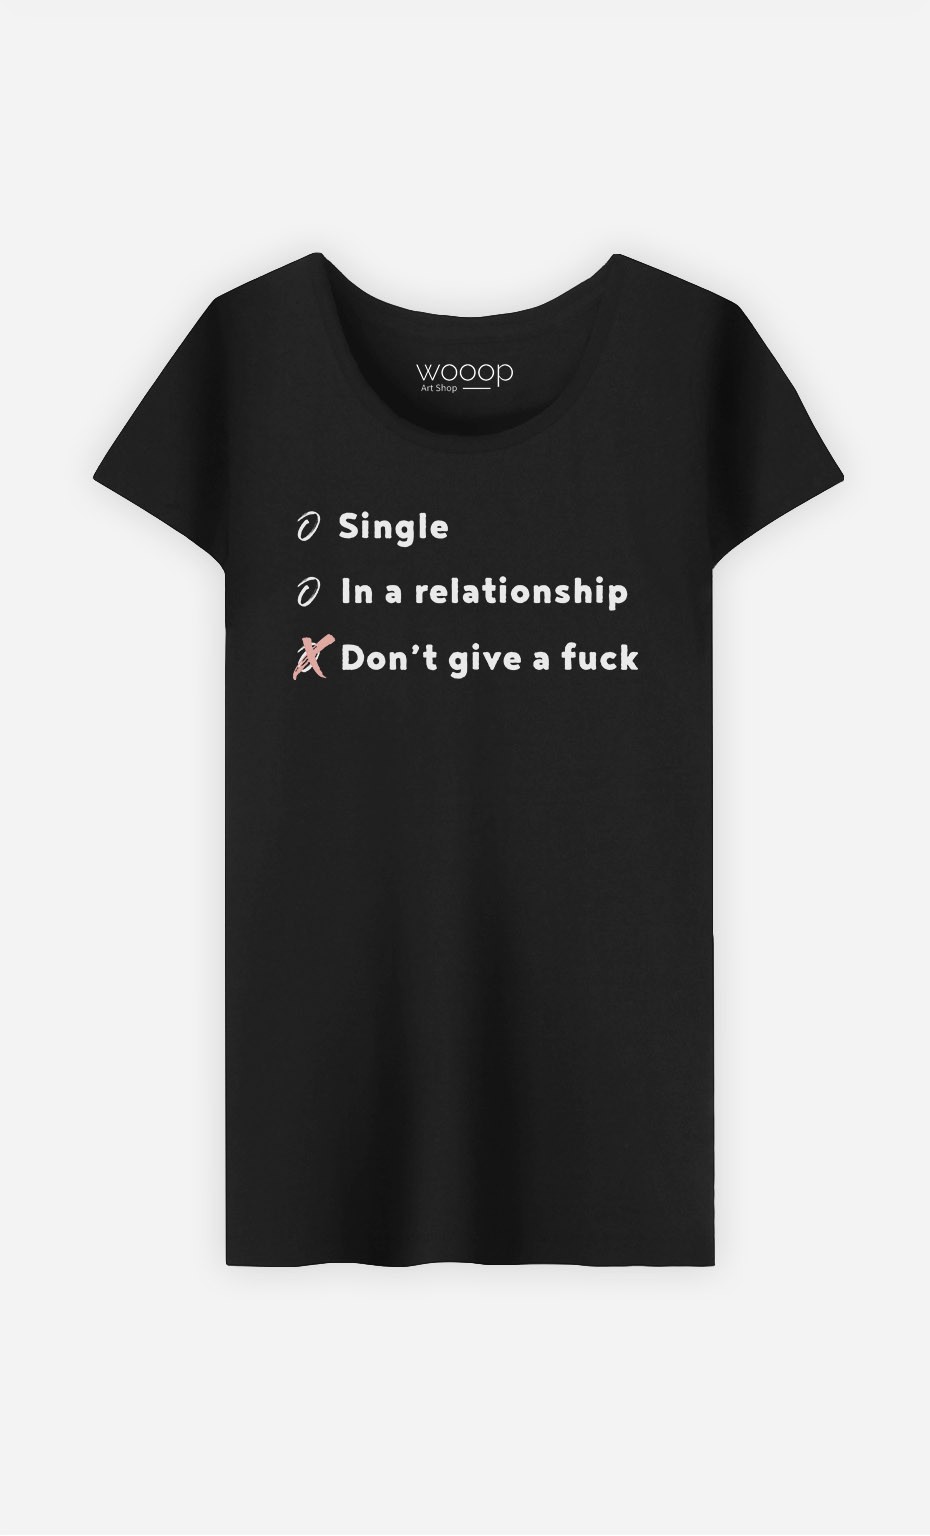 T-Shirt Single, In A Relationship, Don't Give a Fuck